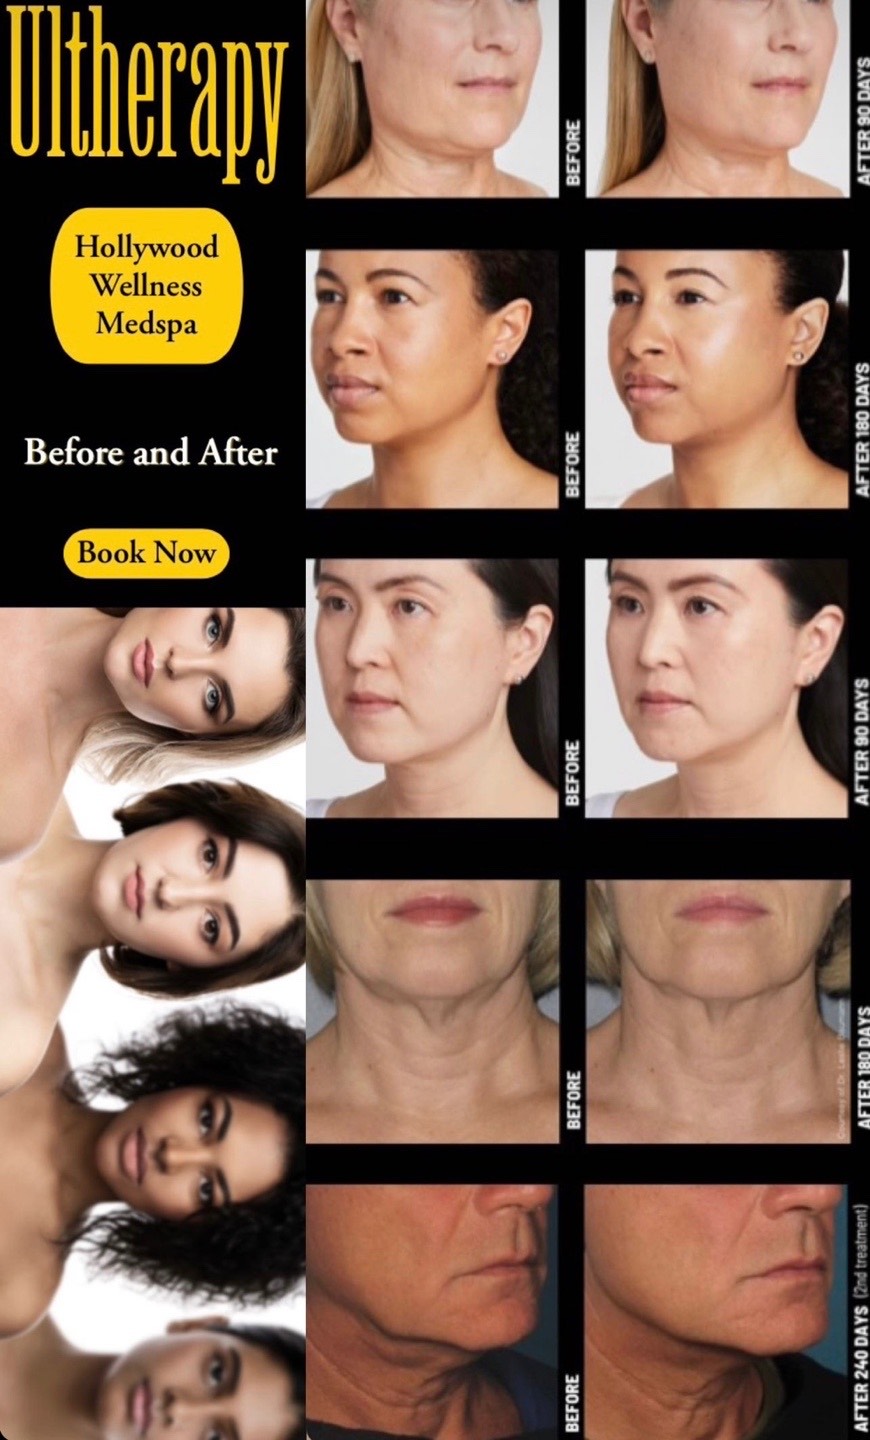 Ultherapy before and after!